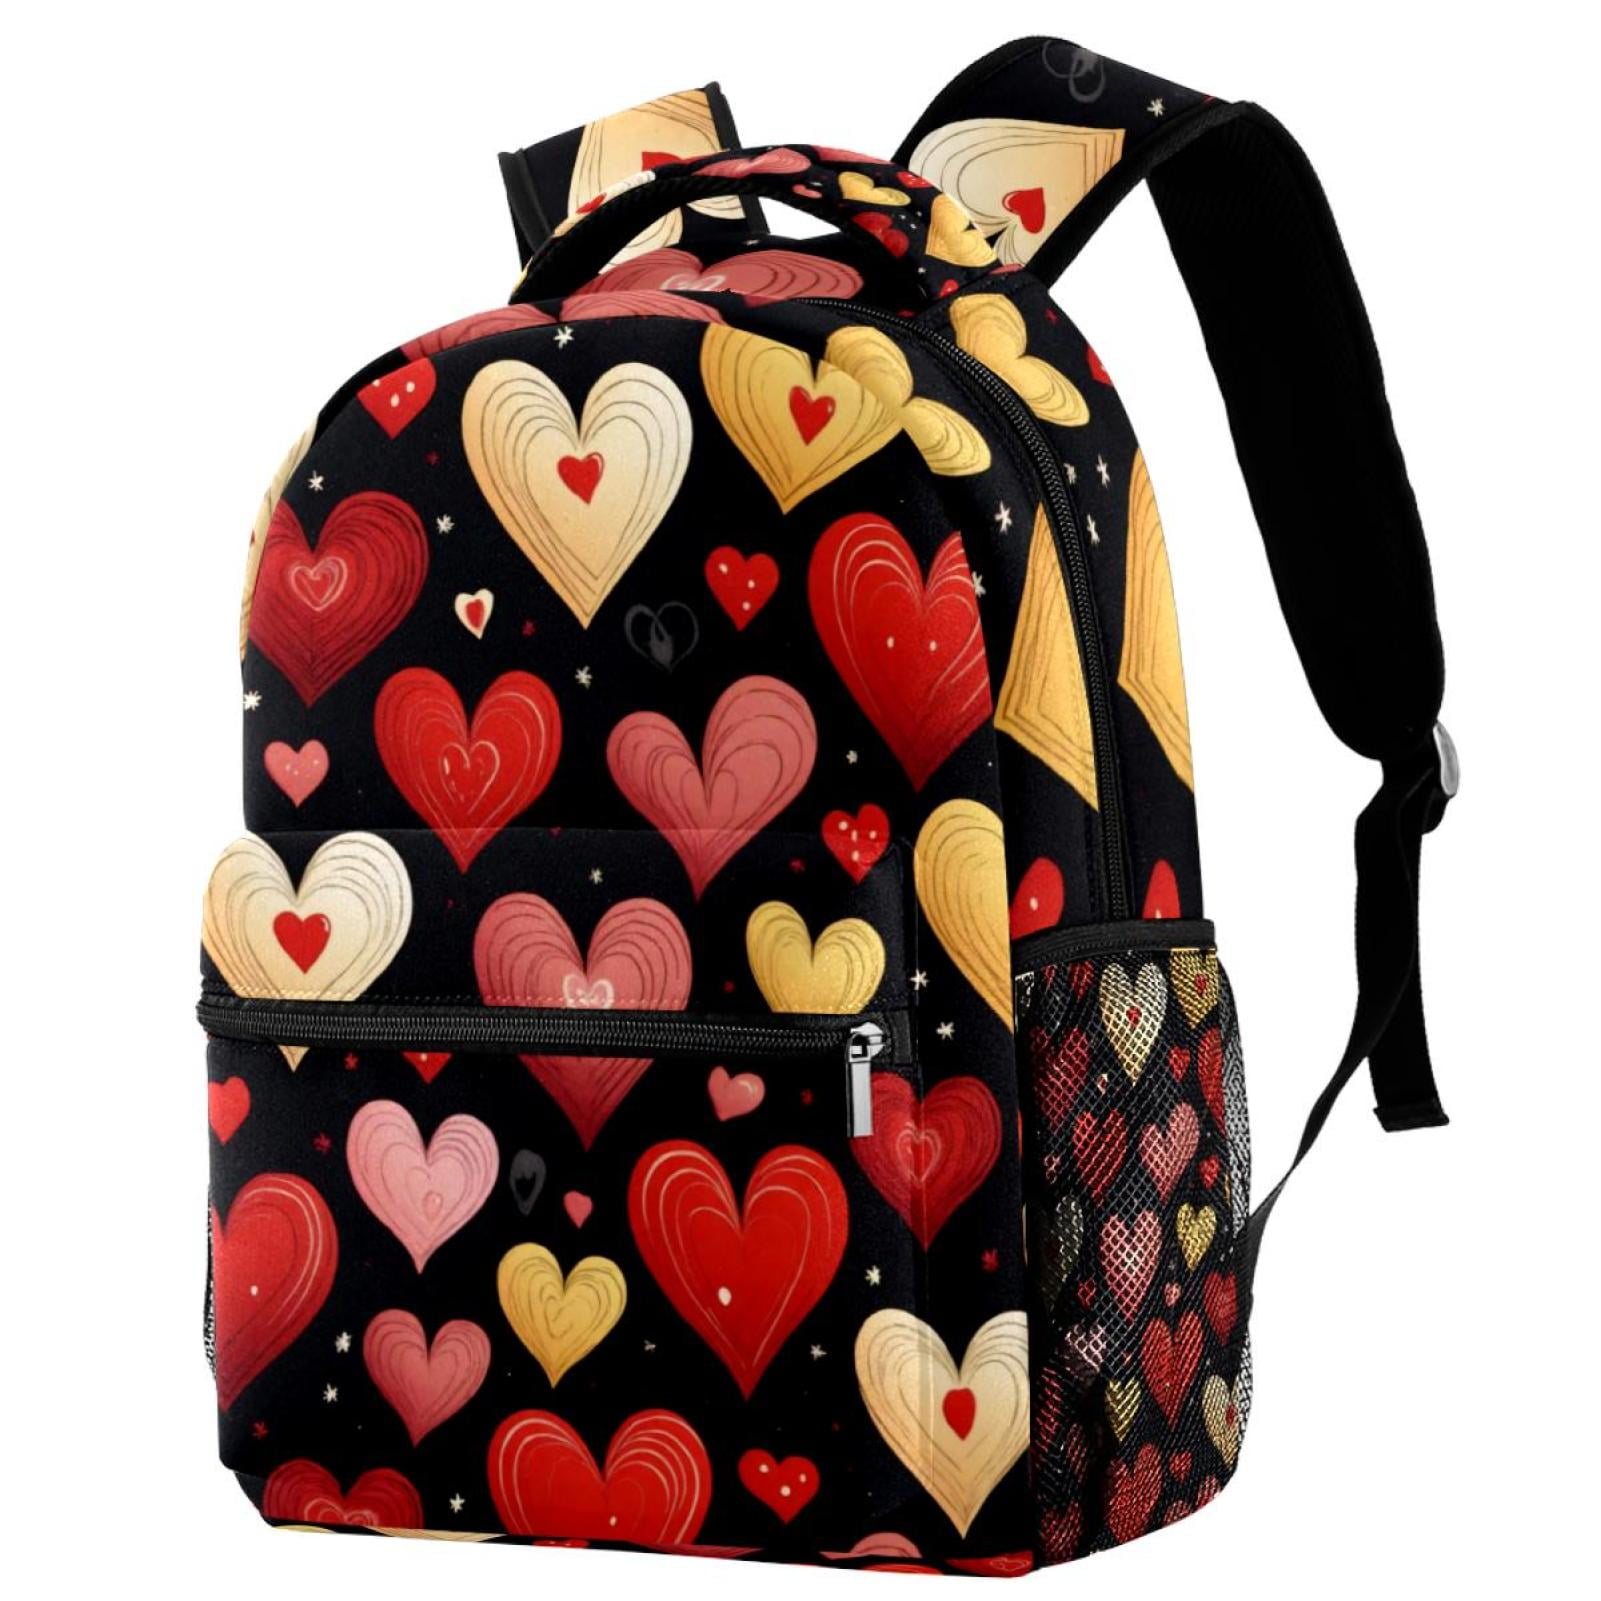 Causal School Backpack, Red Hearts Seamless Daypack with Laptop ...